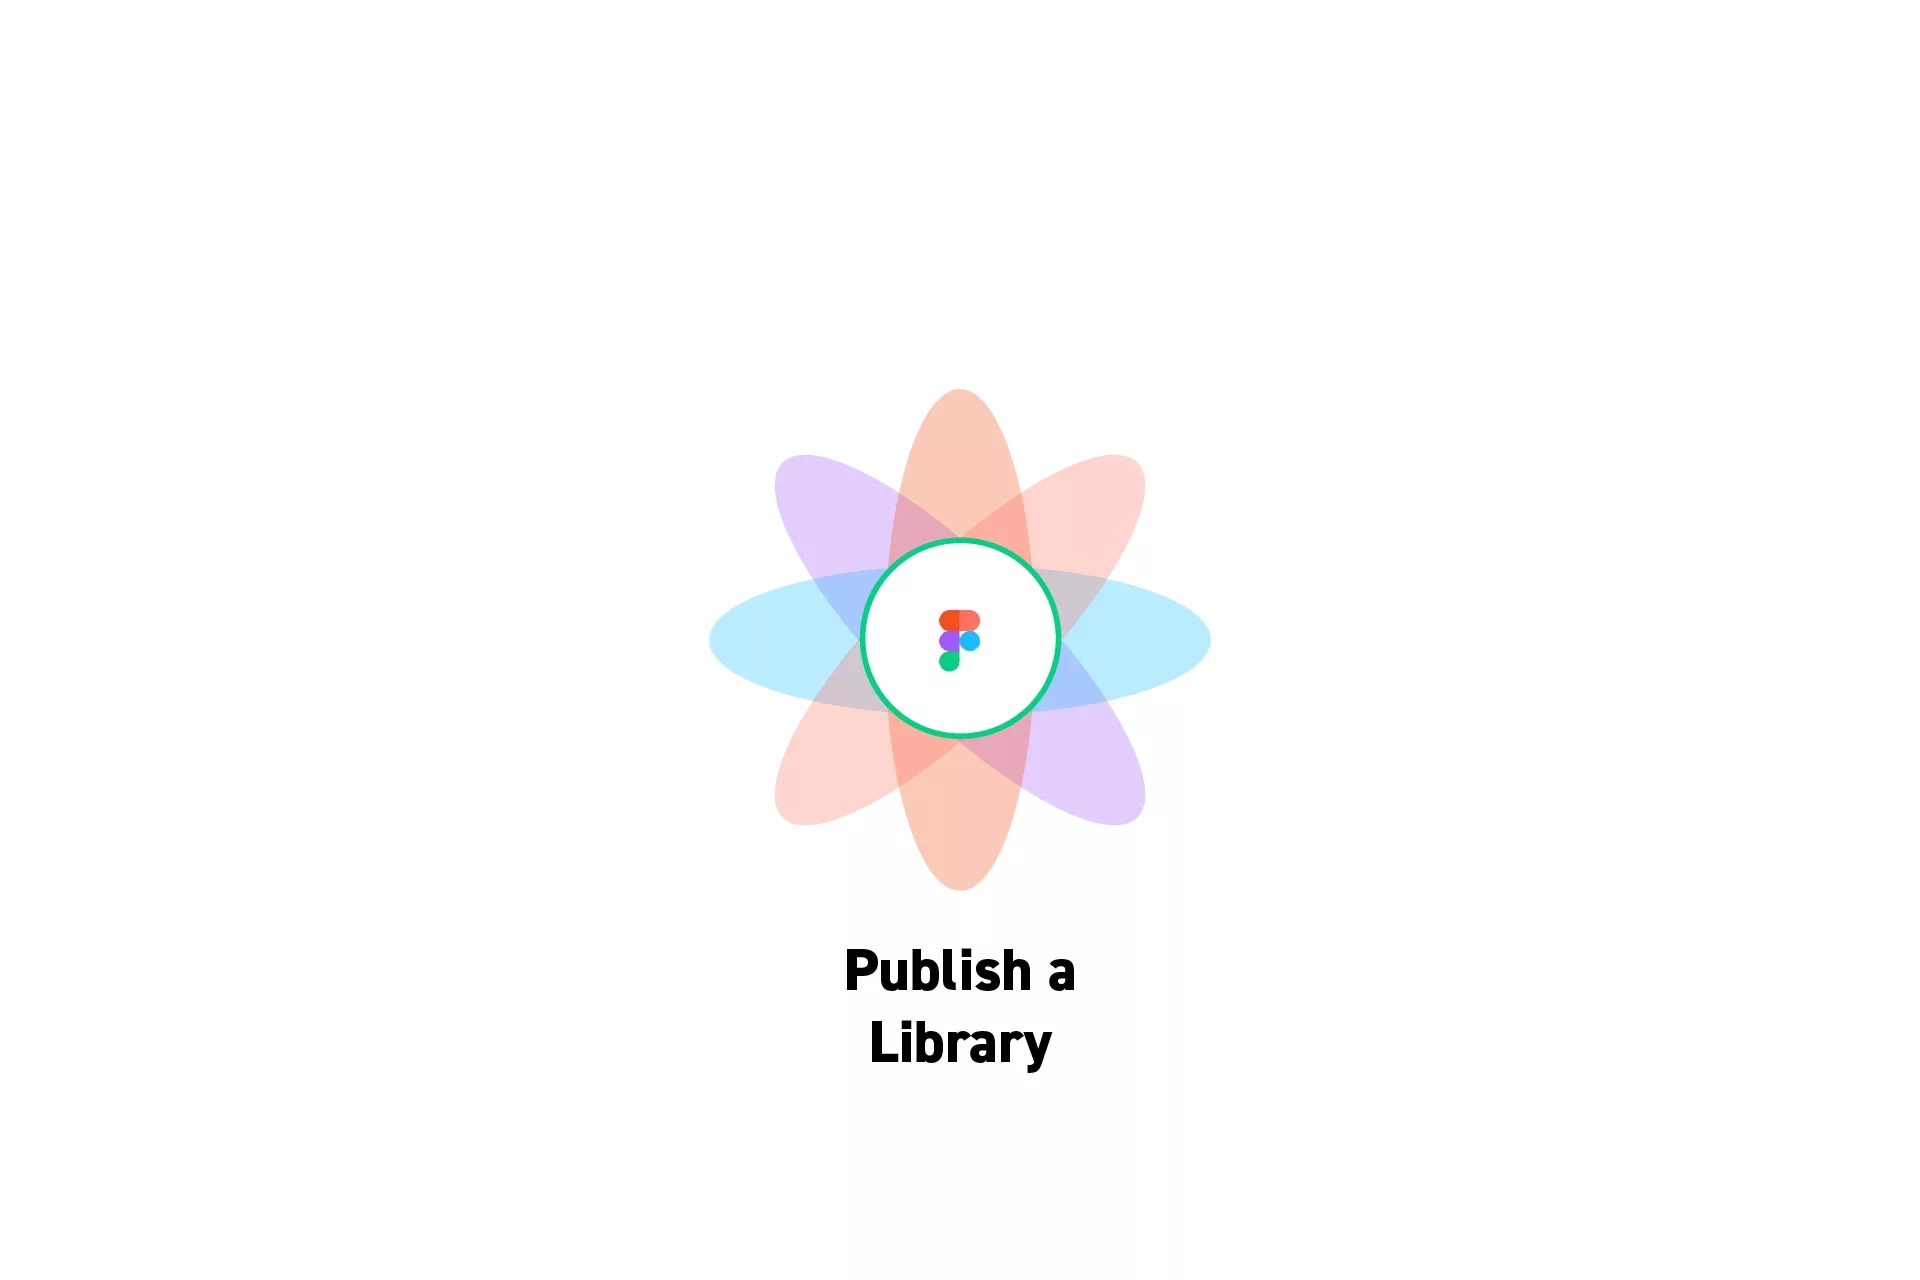 A flower that represents Figma with the text "Publish a Library" beneath it.